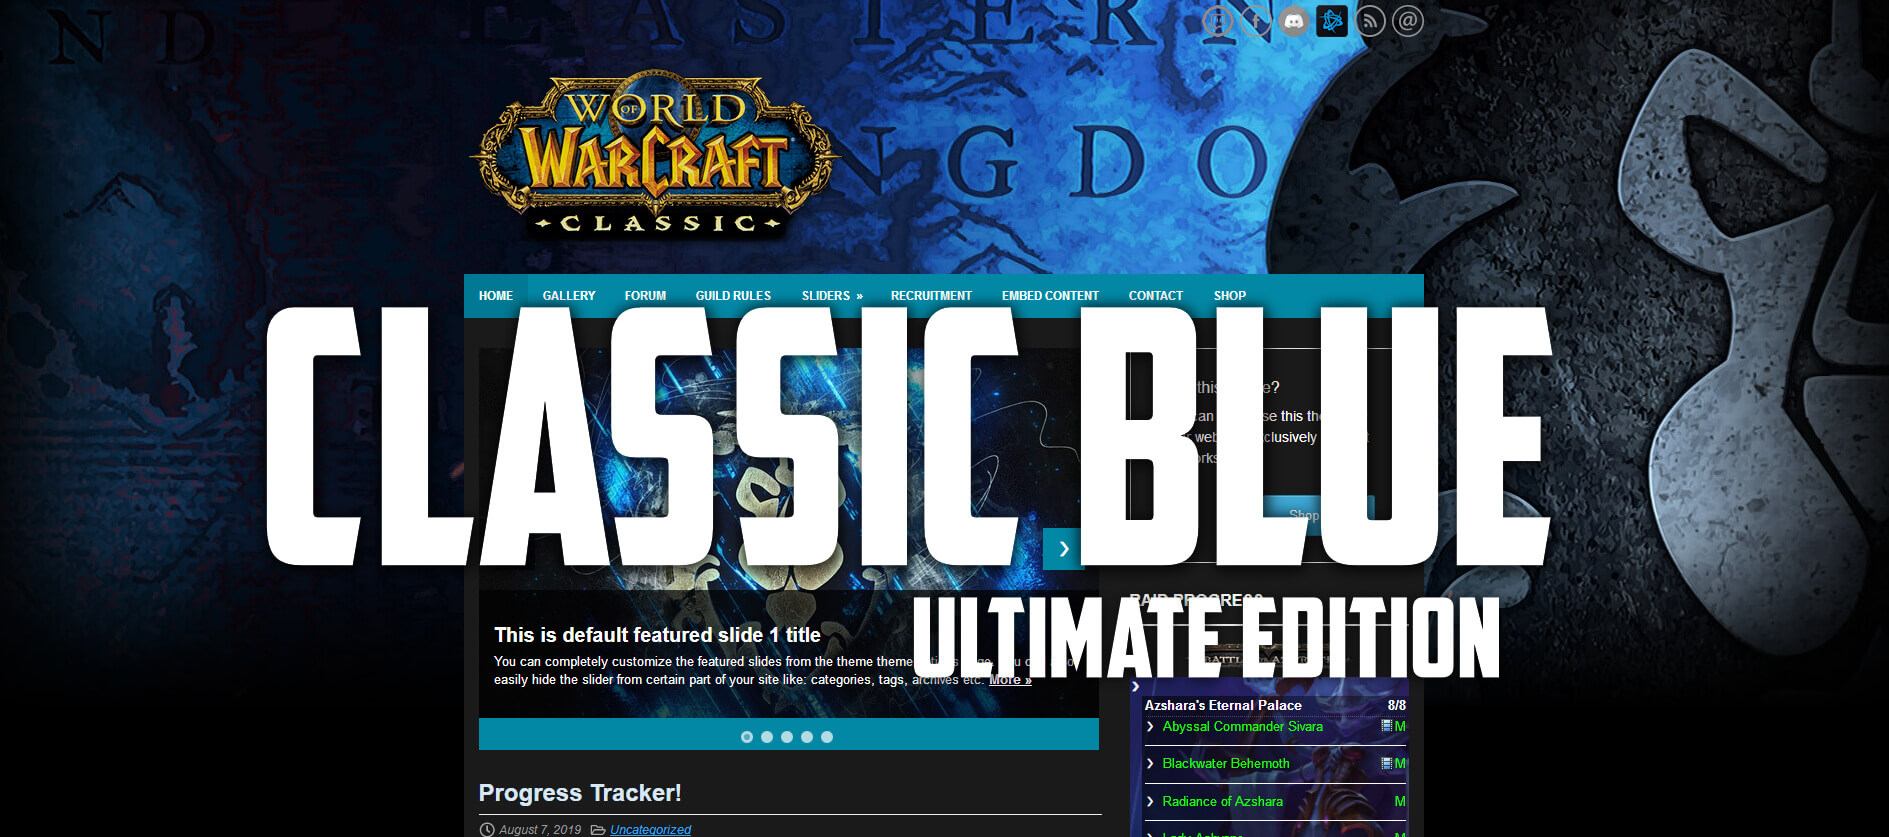 World of Warcraft Classic Edition. The ultimate blue alliance template for wordpress has arrived